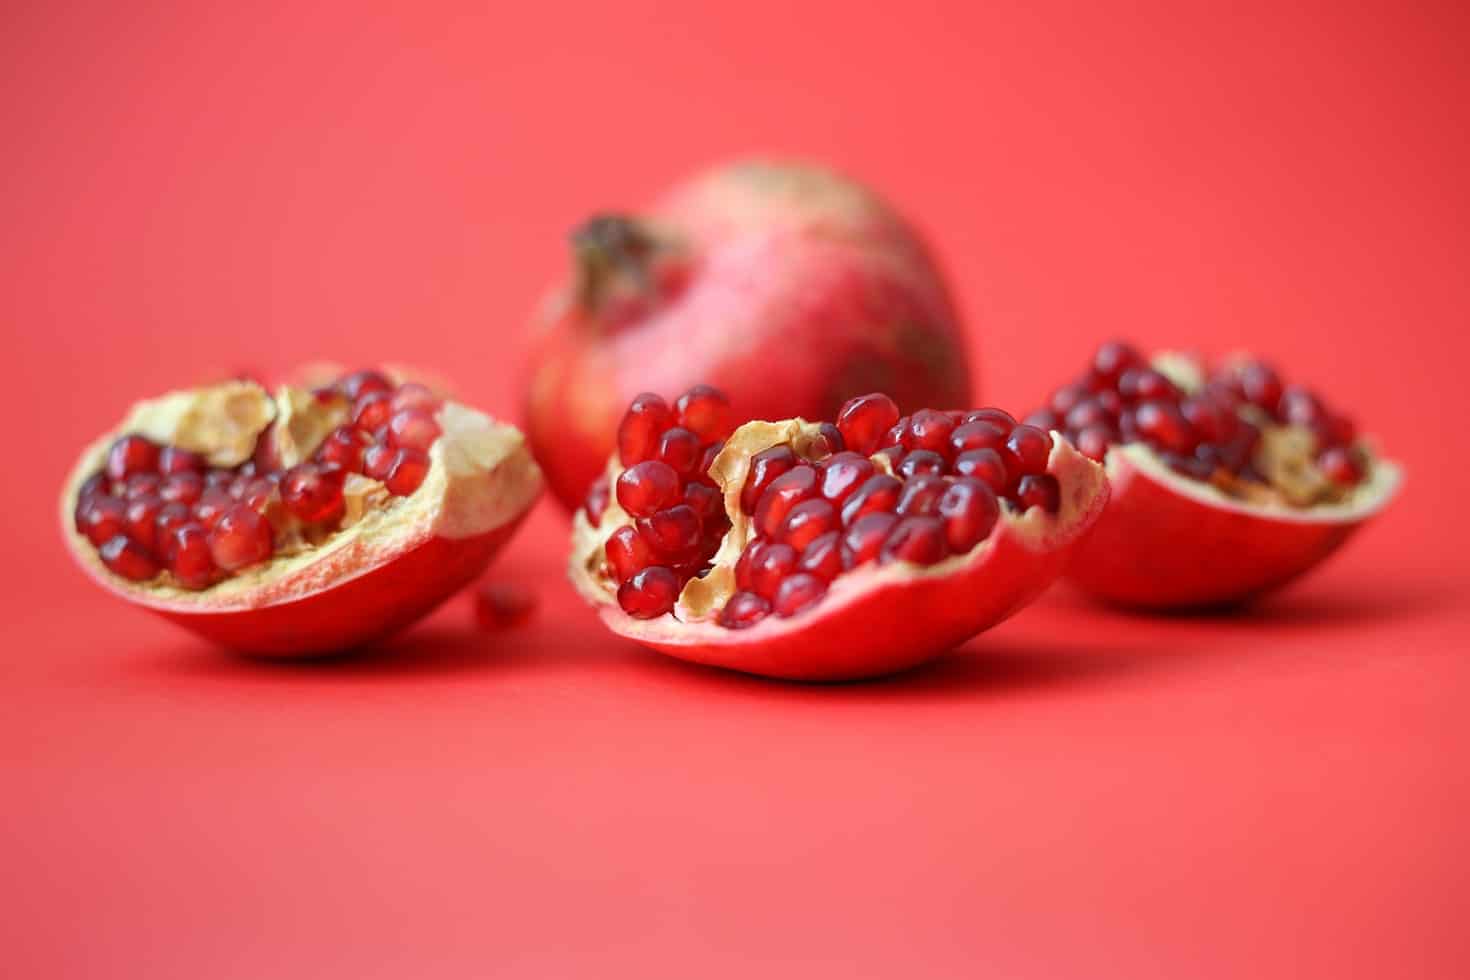 How to Eat Pomegranate Properly